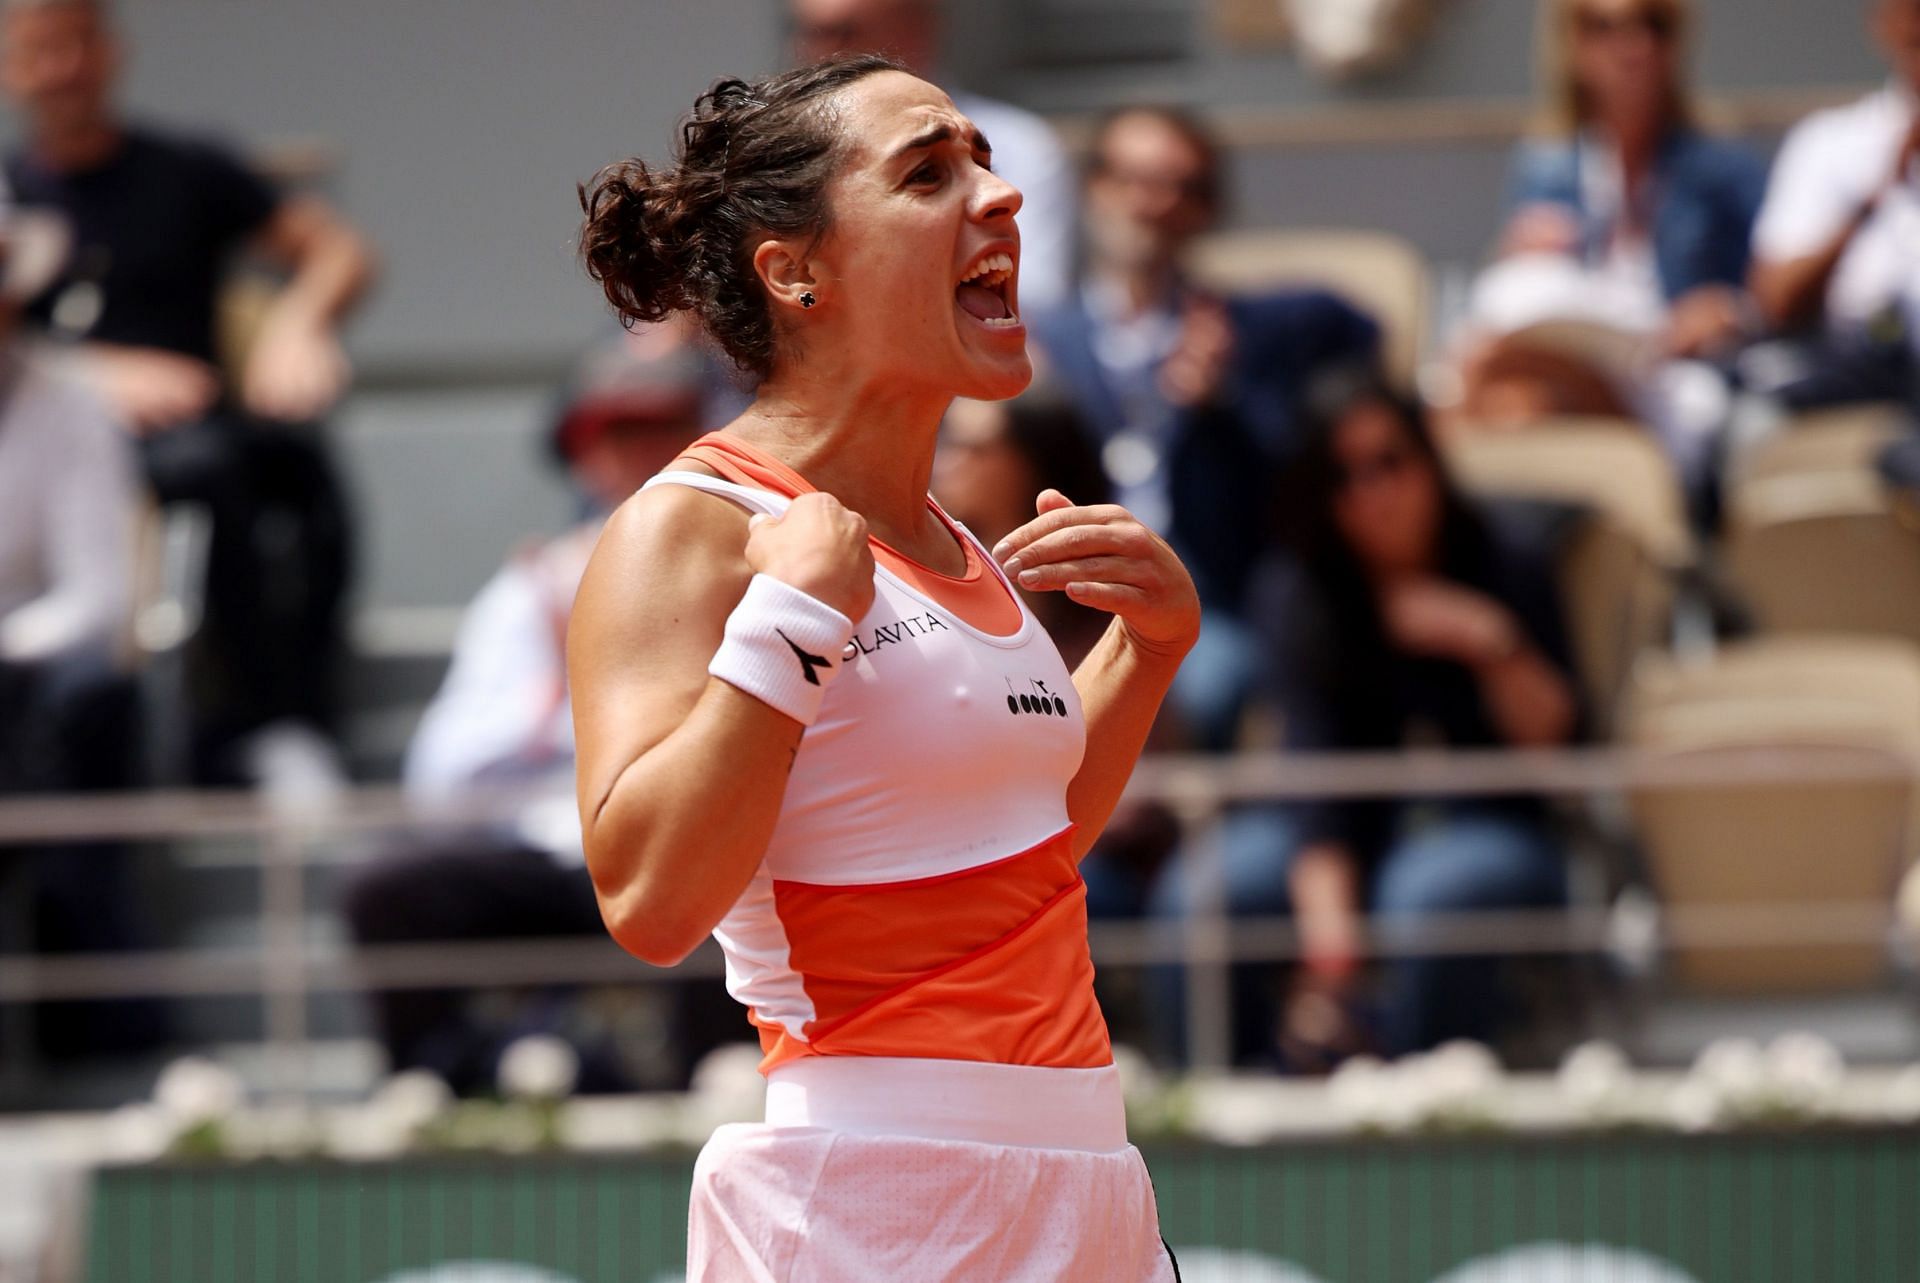 Martina Trevisan celebrates her quarterfinal win at the 2022 French Open